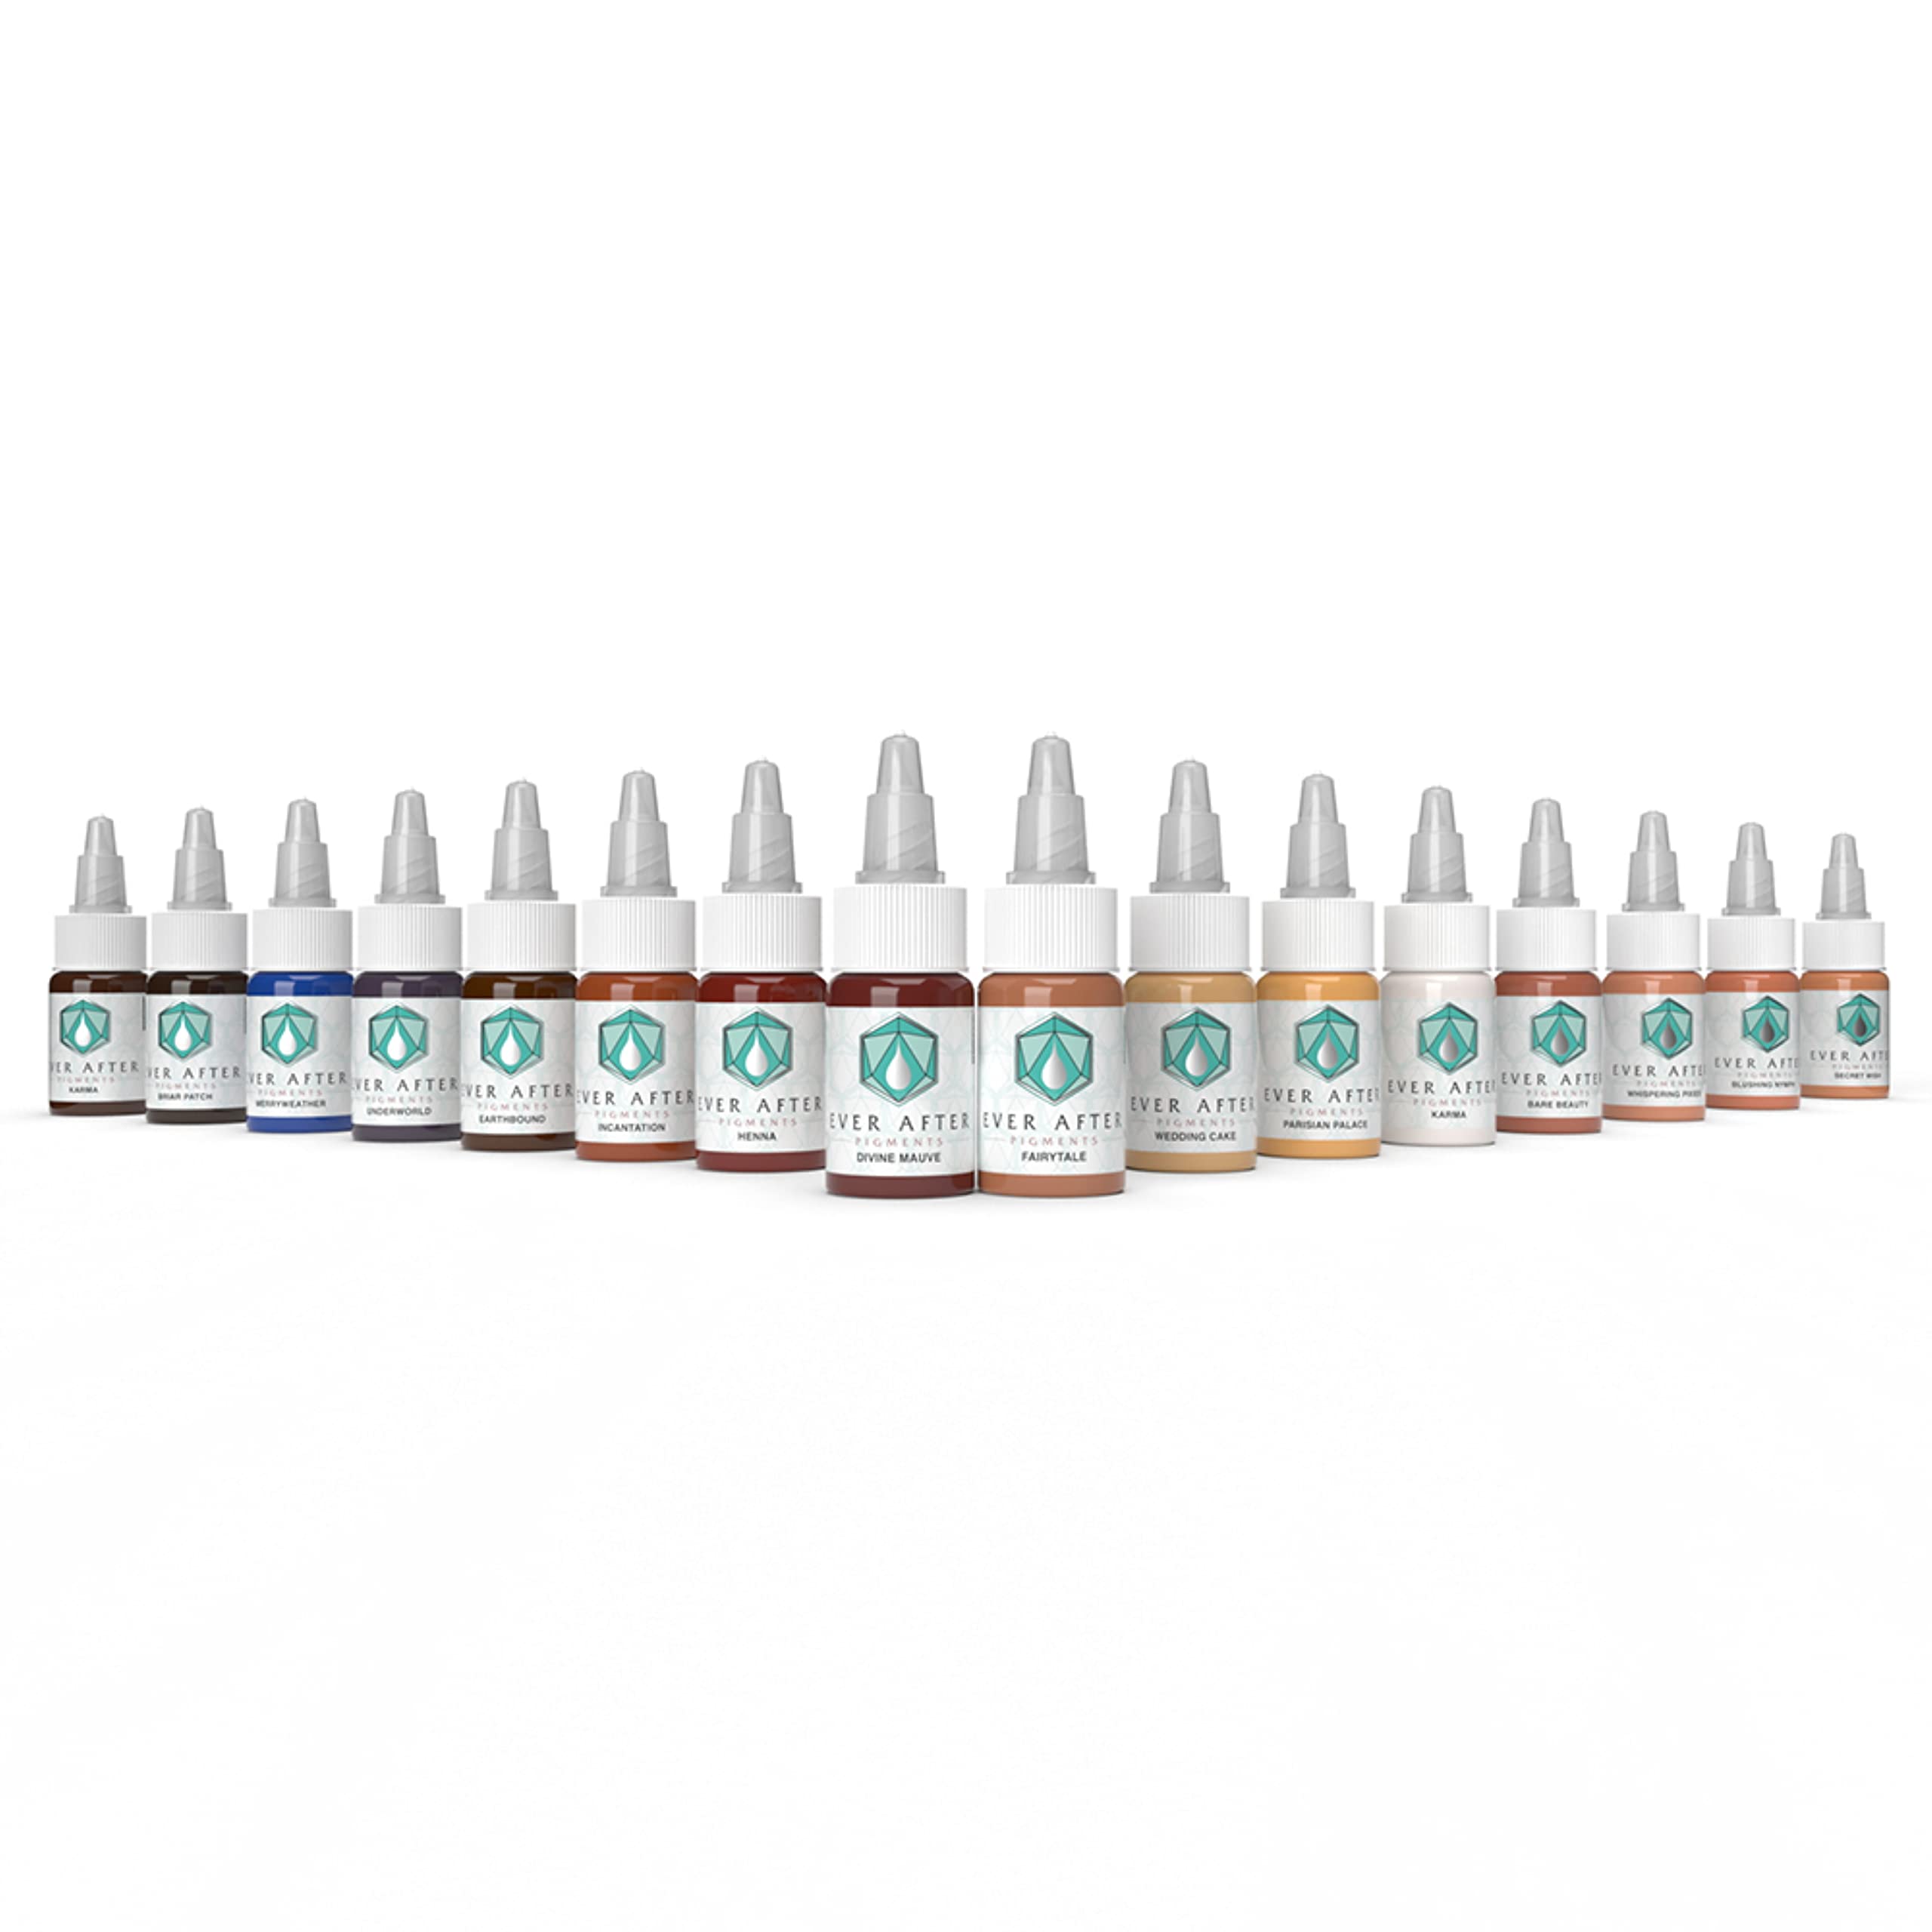 Ever After Pigments Areola Color Set Collection, Microblading, Professional Cosmetic, Vegan, Organic, Made in USA, 16 pack of 1/2 oz bottles